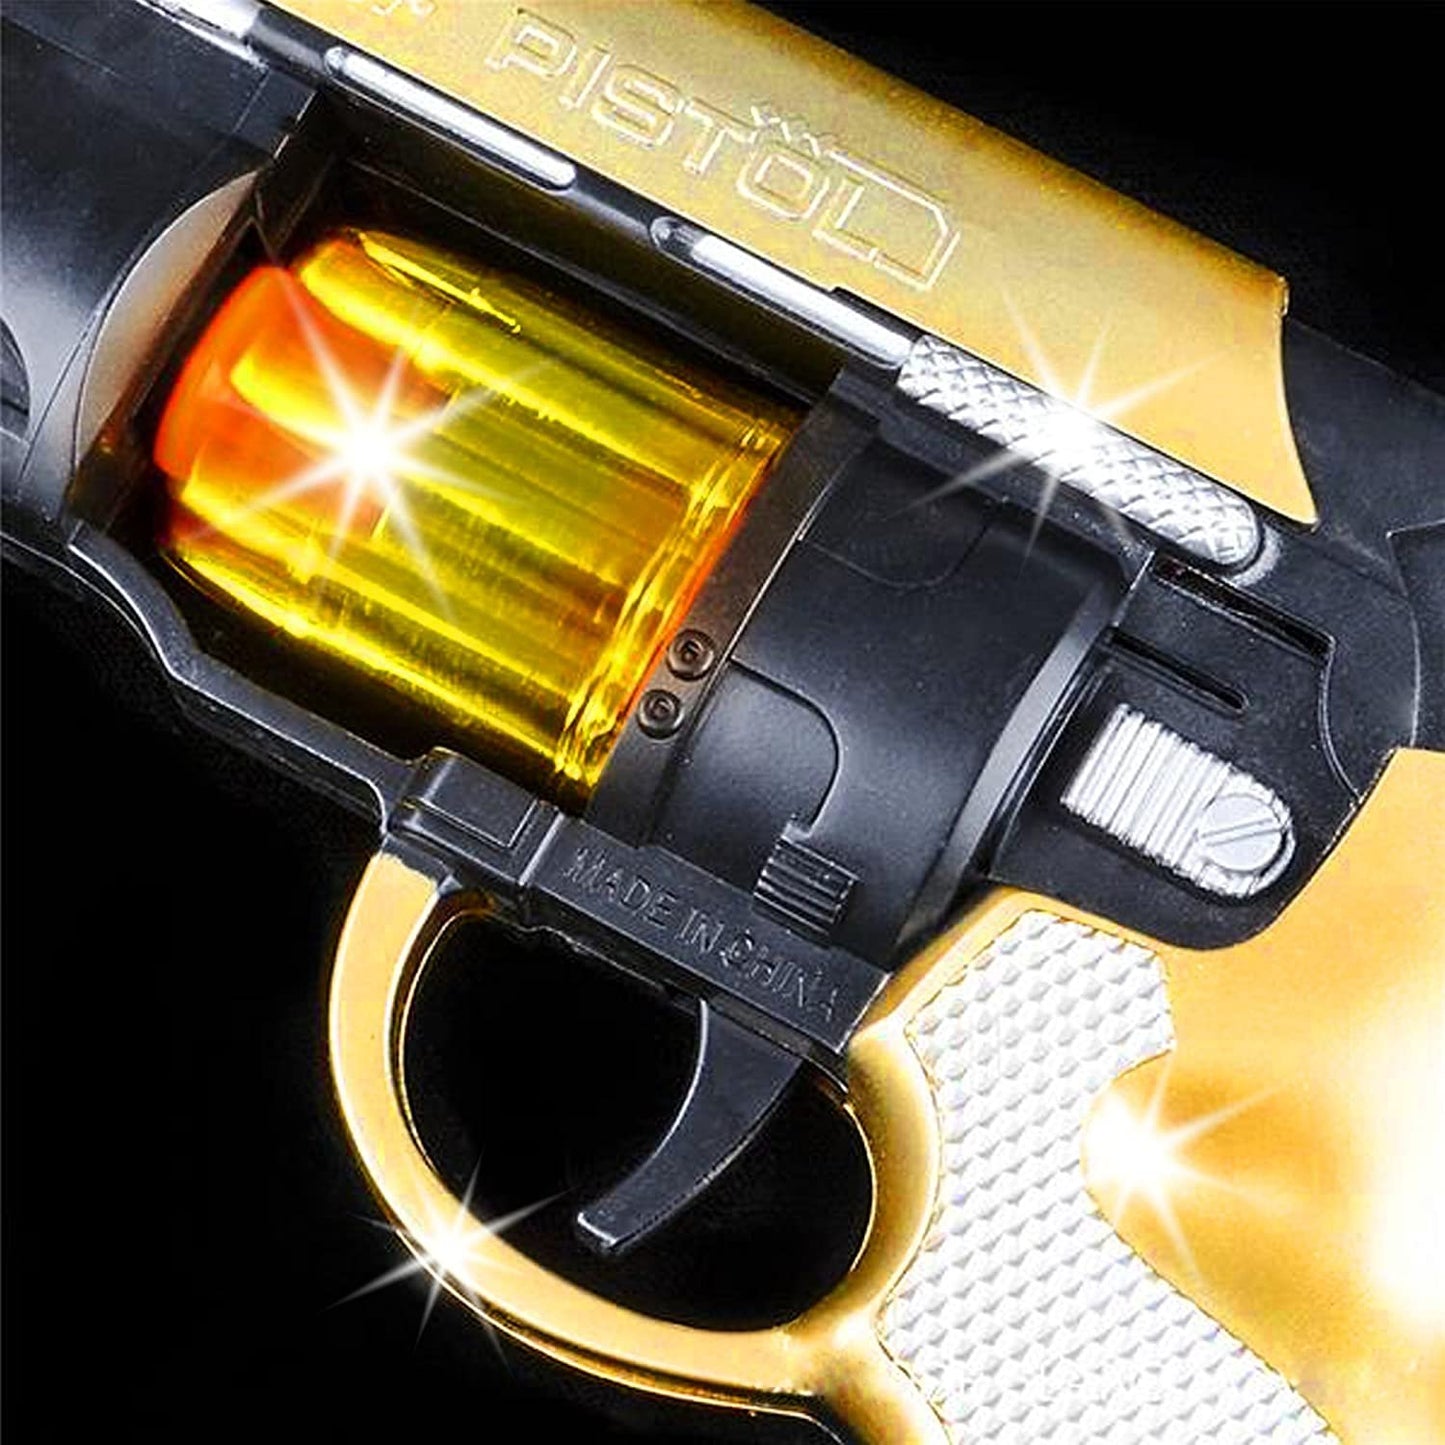 Blade Runner Toy Pistol by ArtCreativity Toy Gun for Kids with LED and Sound Effects, Design, Batteries Included, Sturdy Plastic Design, Great Gift Idea for Boys & Girls